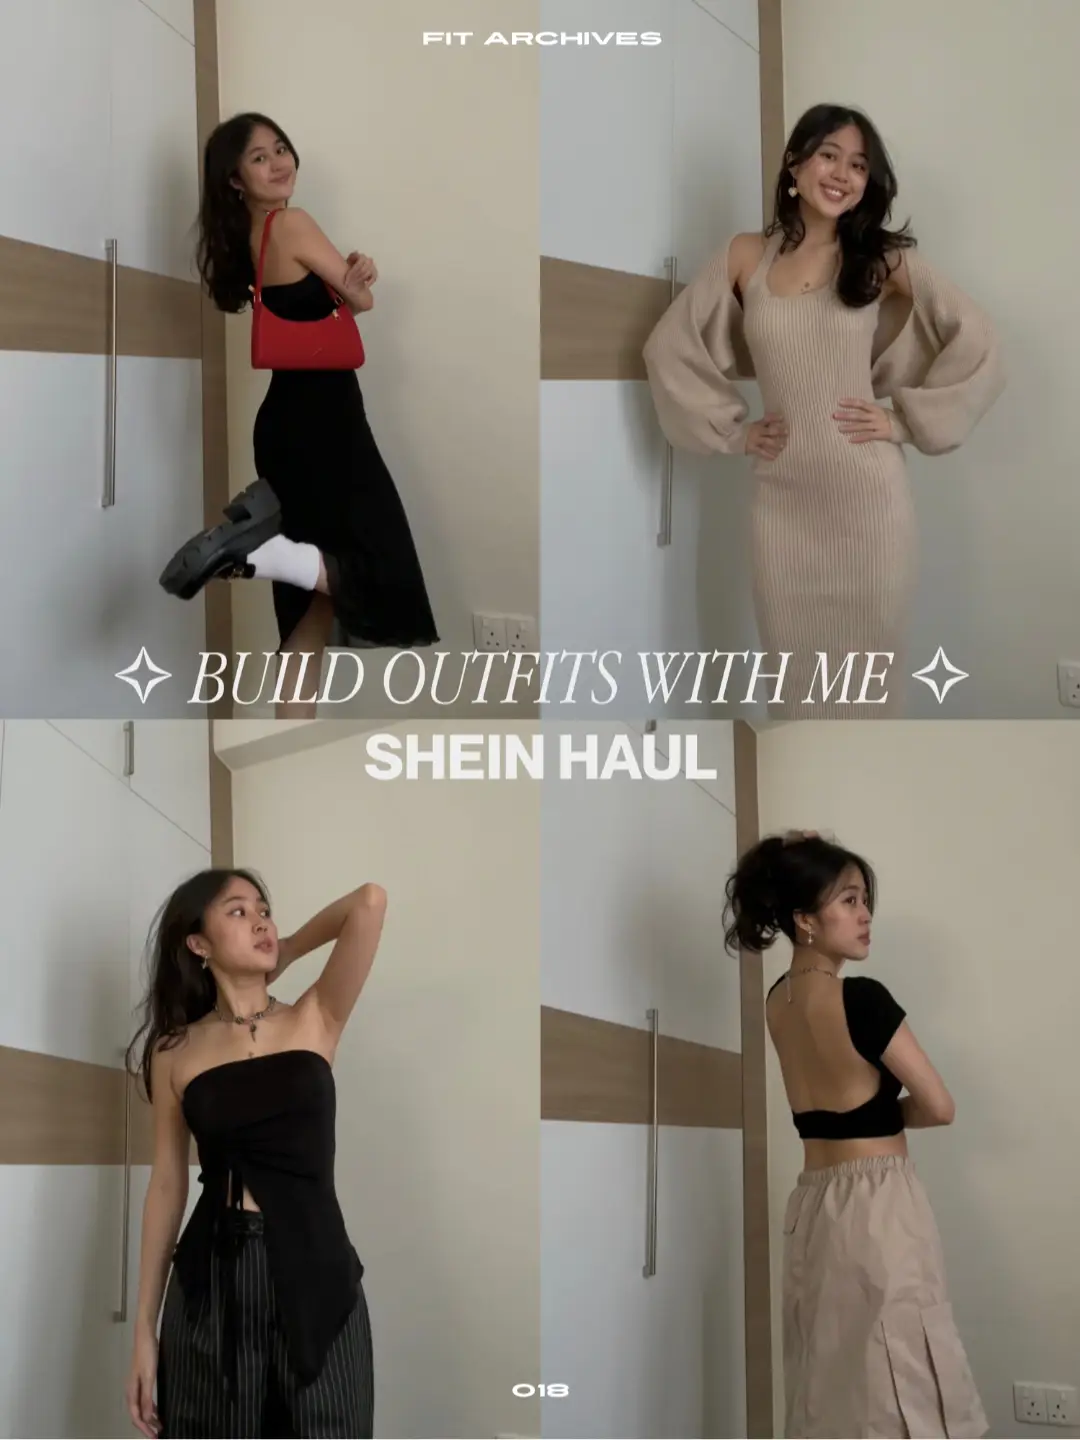 Fit archives, build fits with me ft. shein haul